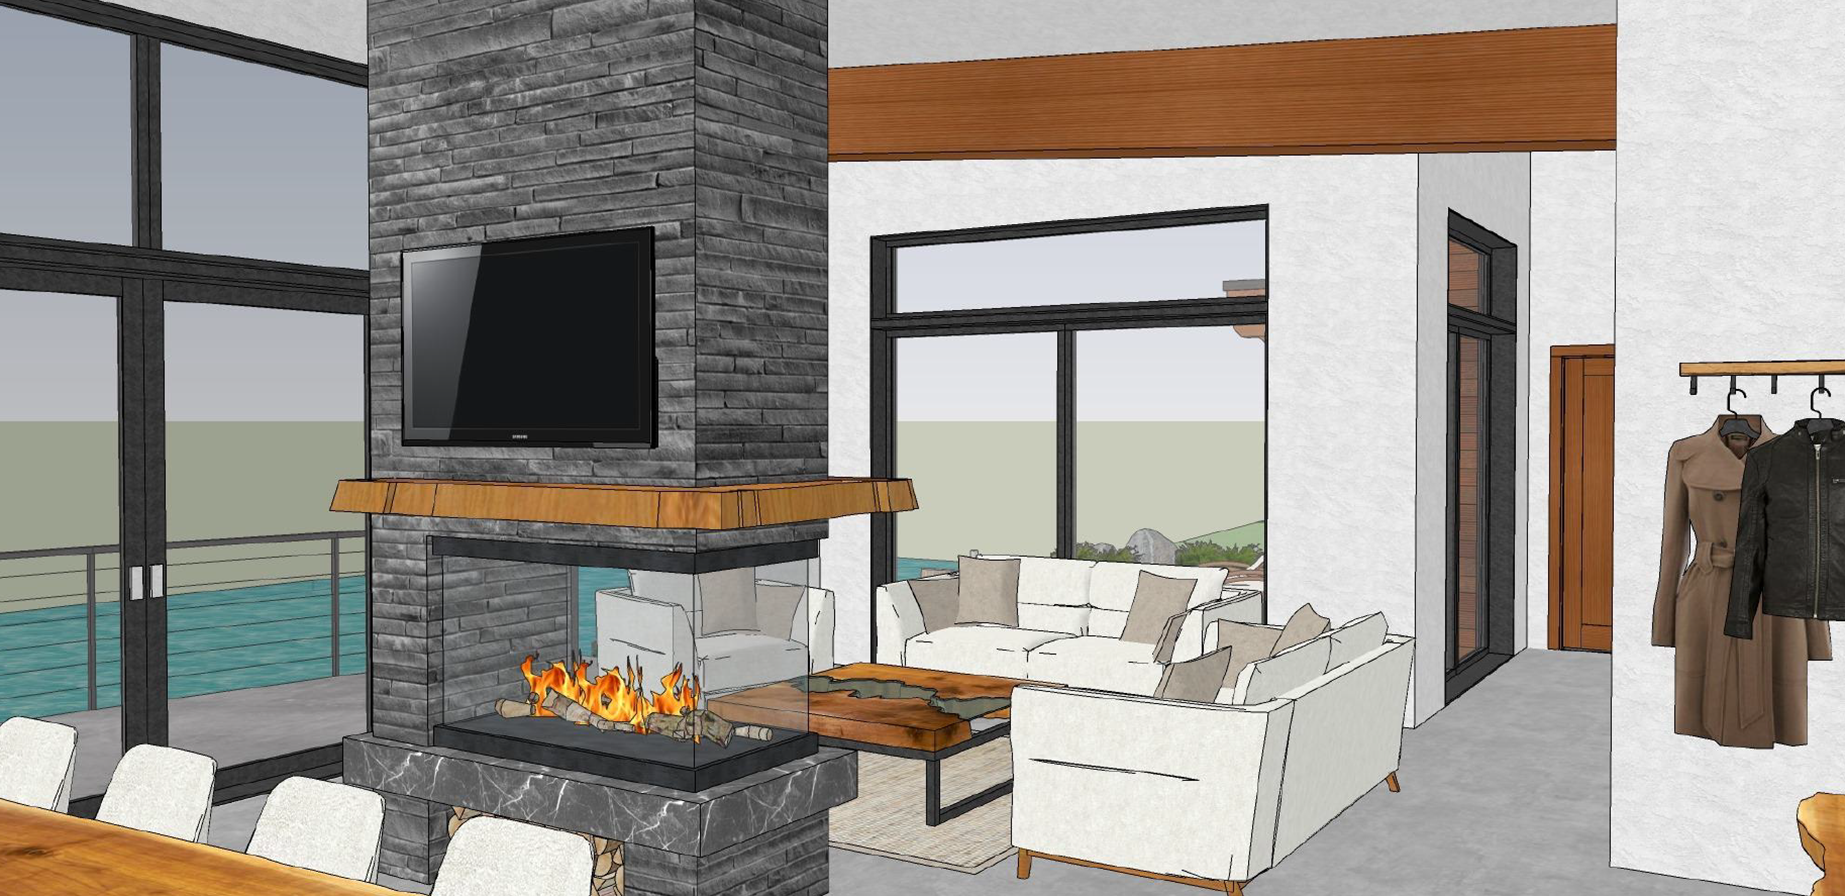 design of a stoned fireplace dividing the living area and dining